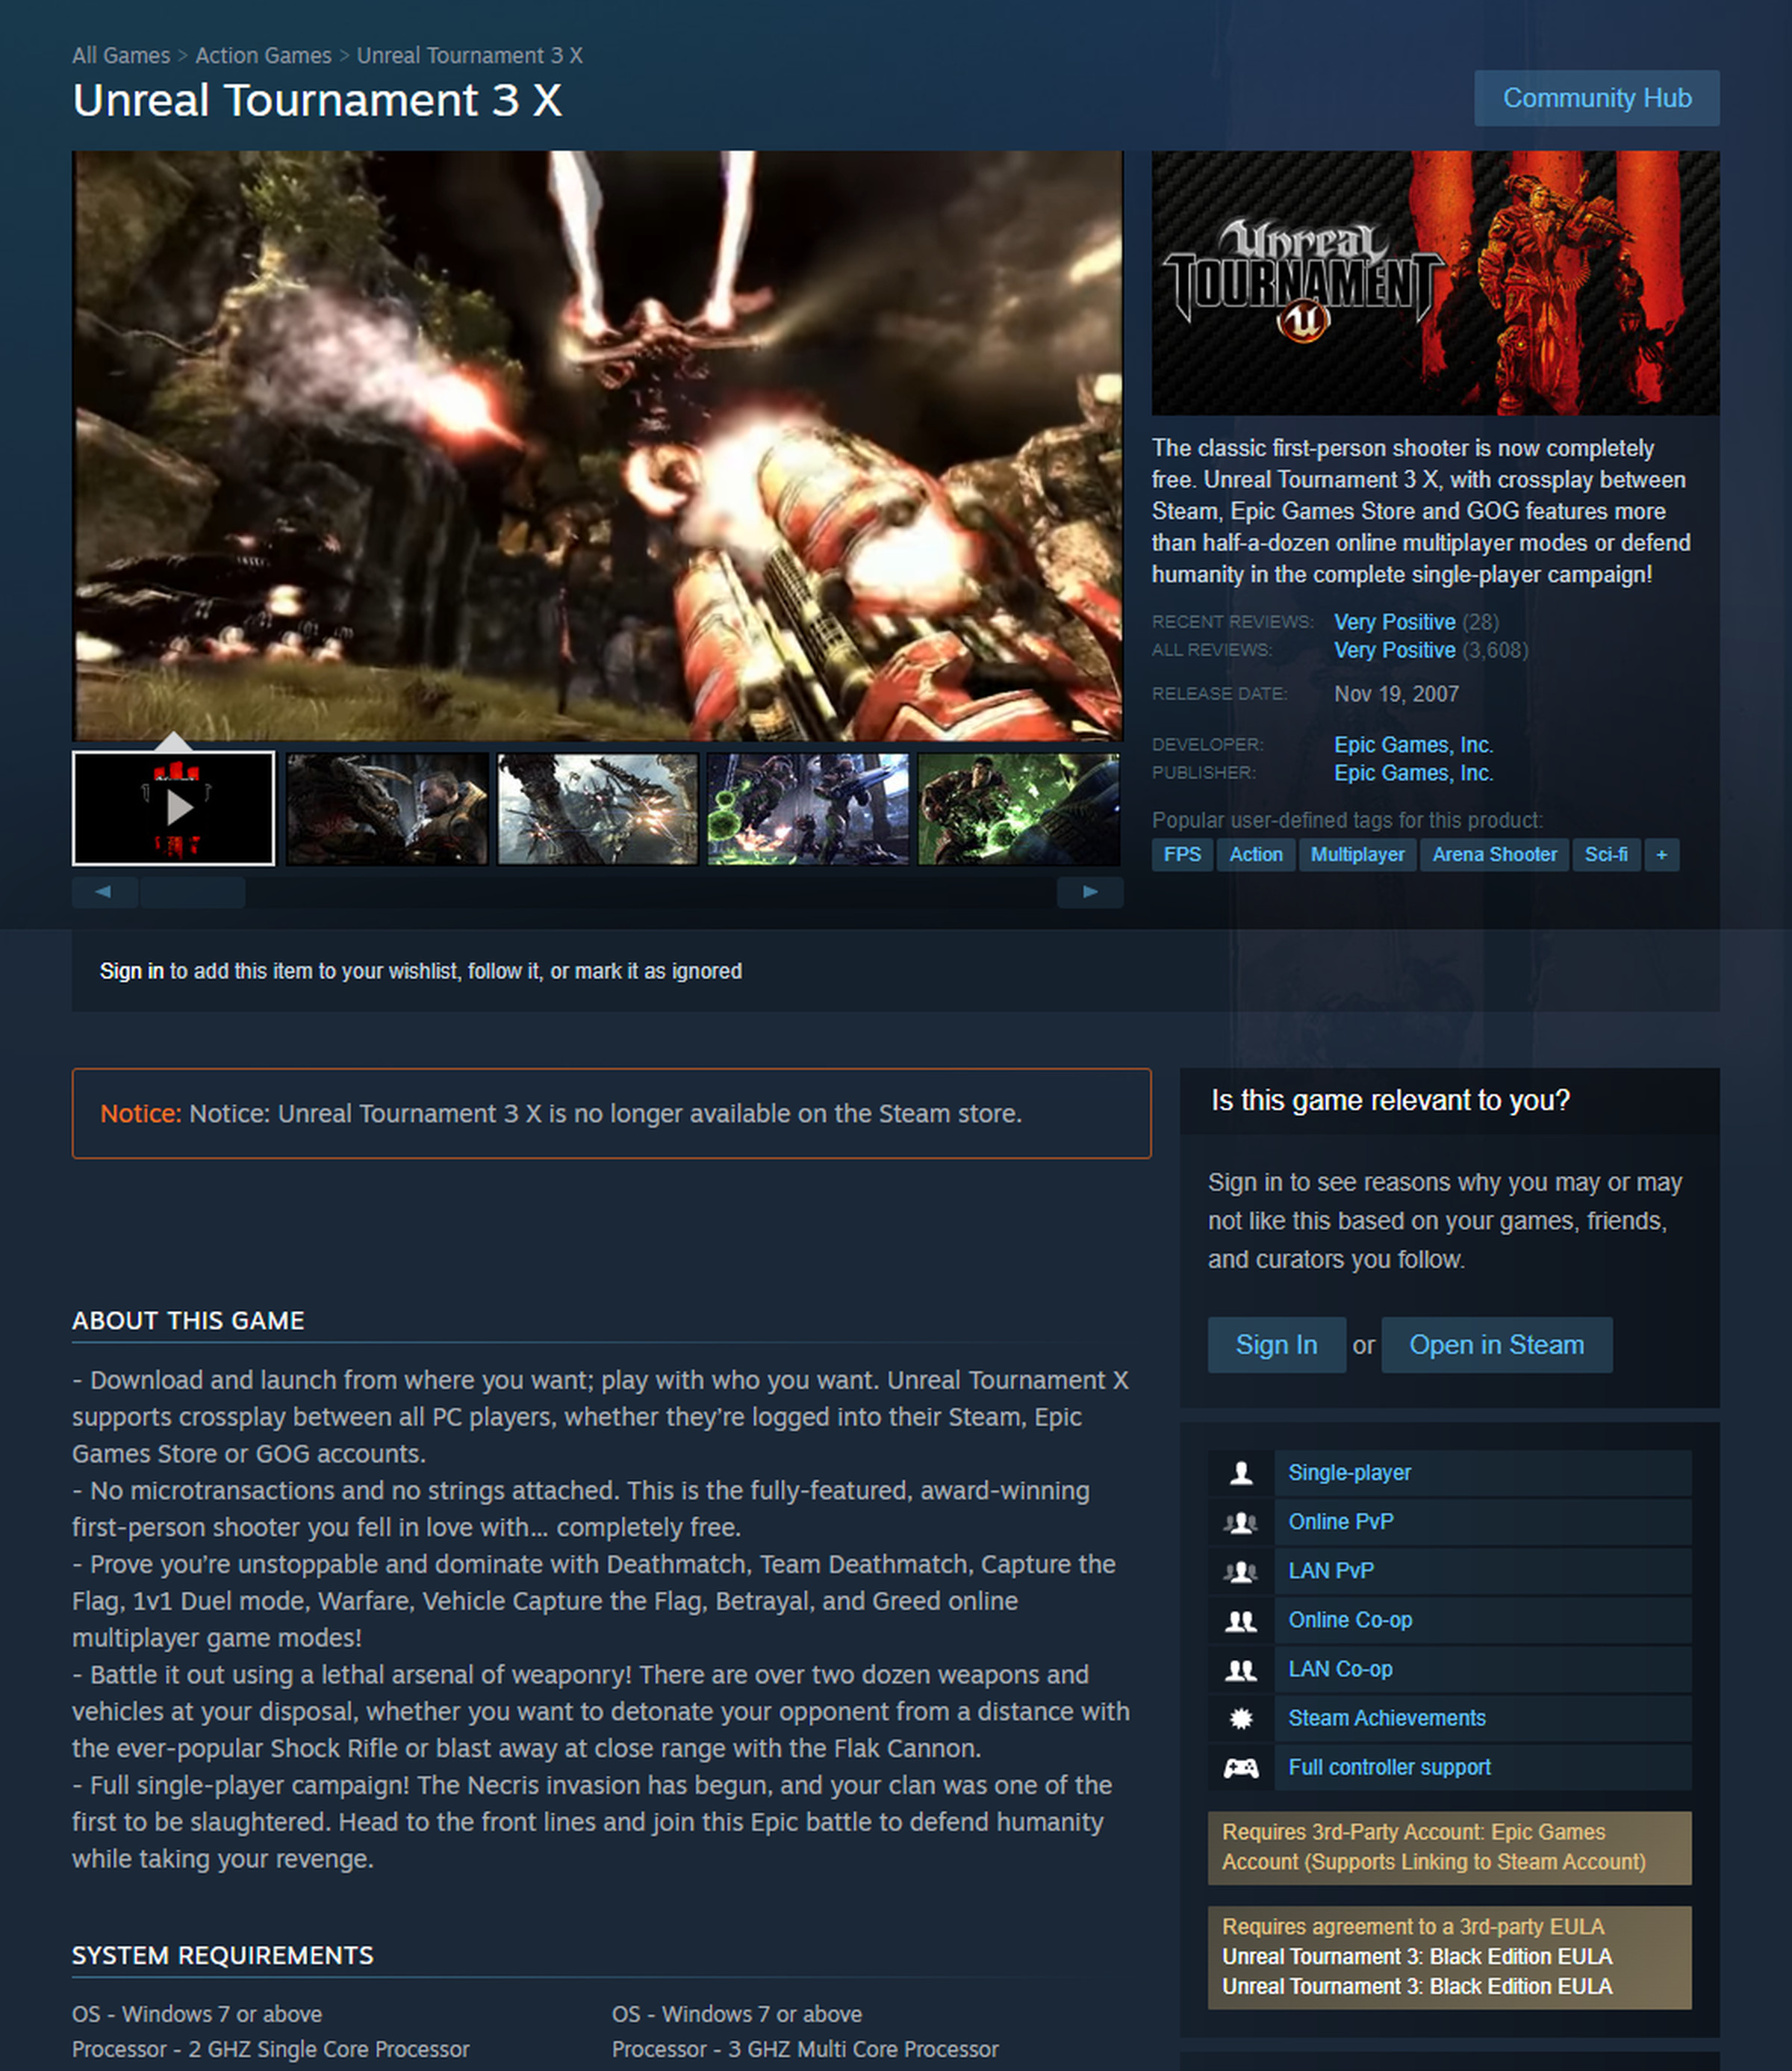 The Unreal Tournament 3 X page on Steam. Tap here to open a larger image.